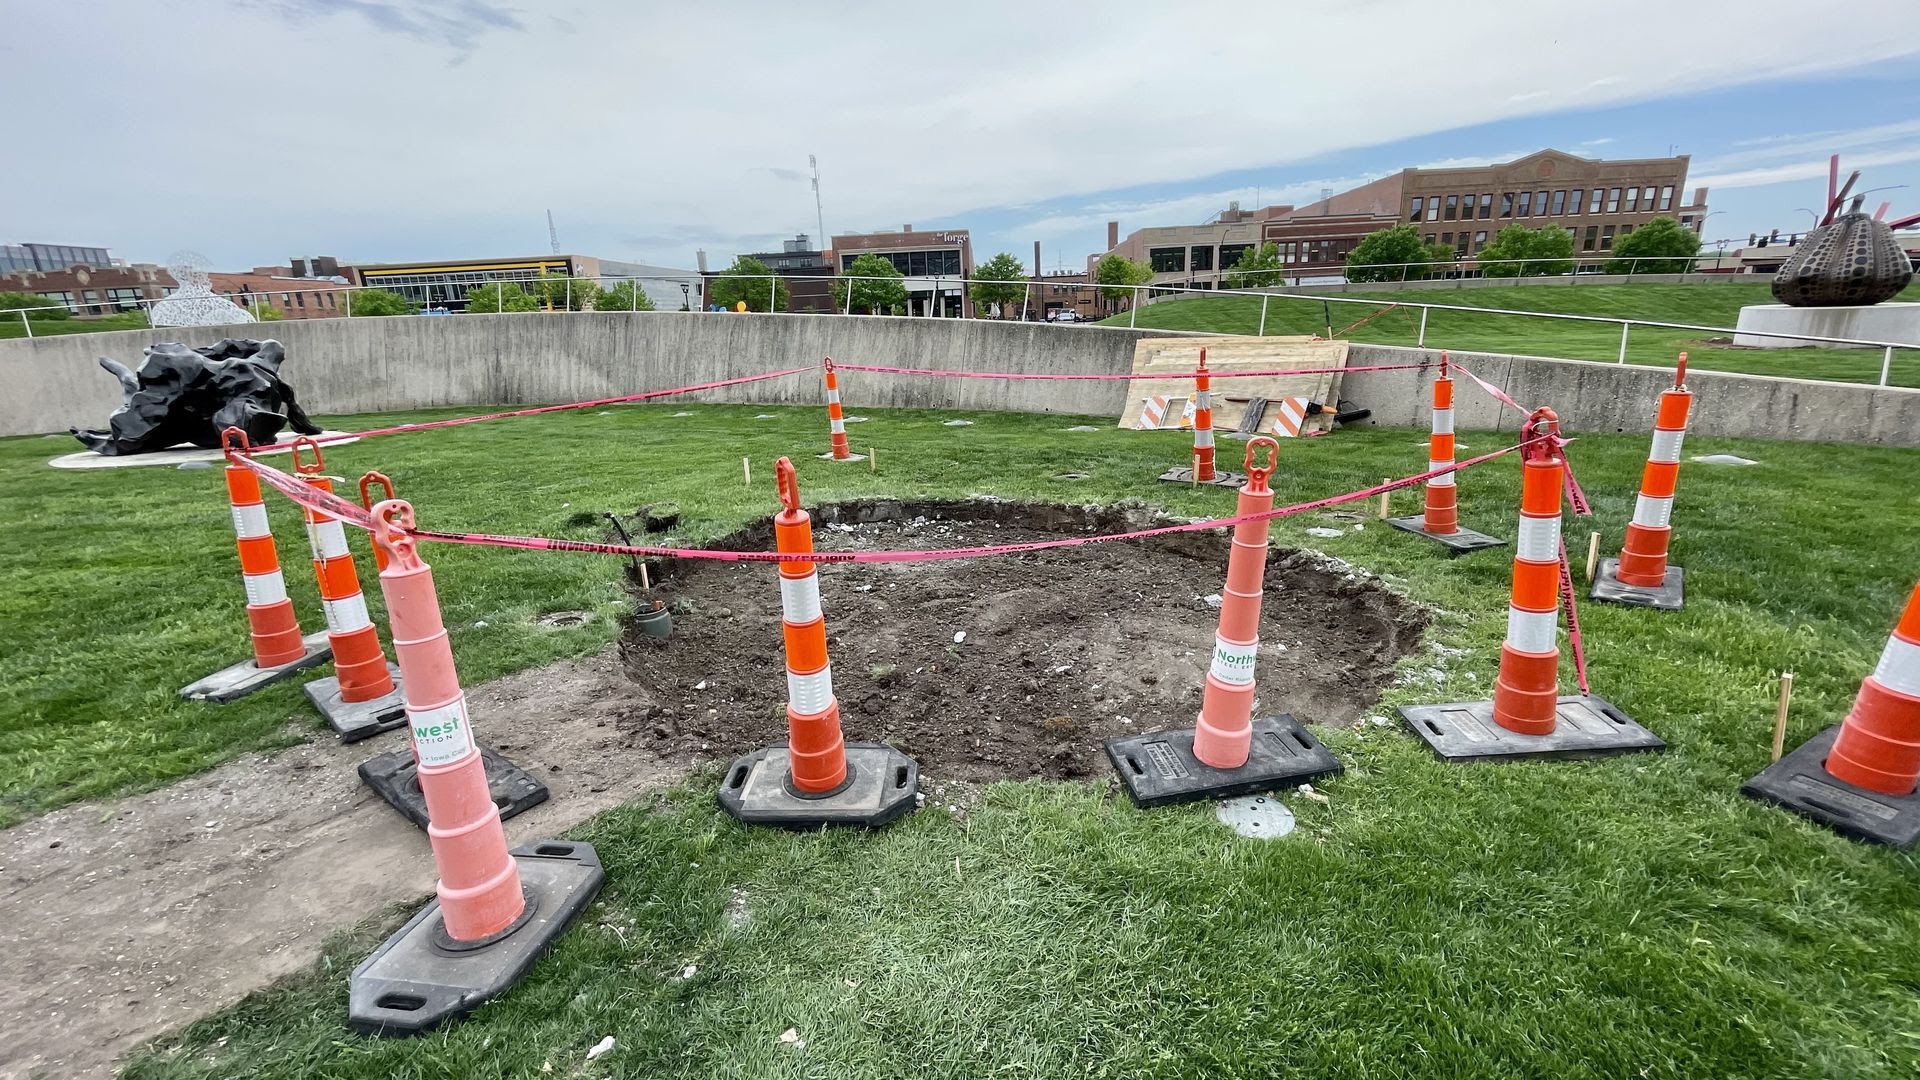 A photo of a dirt hole surrounded by traffic cones where the "Love" sculpture once stood in Des Moines' Pappajohn Sculpture Park.